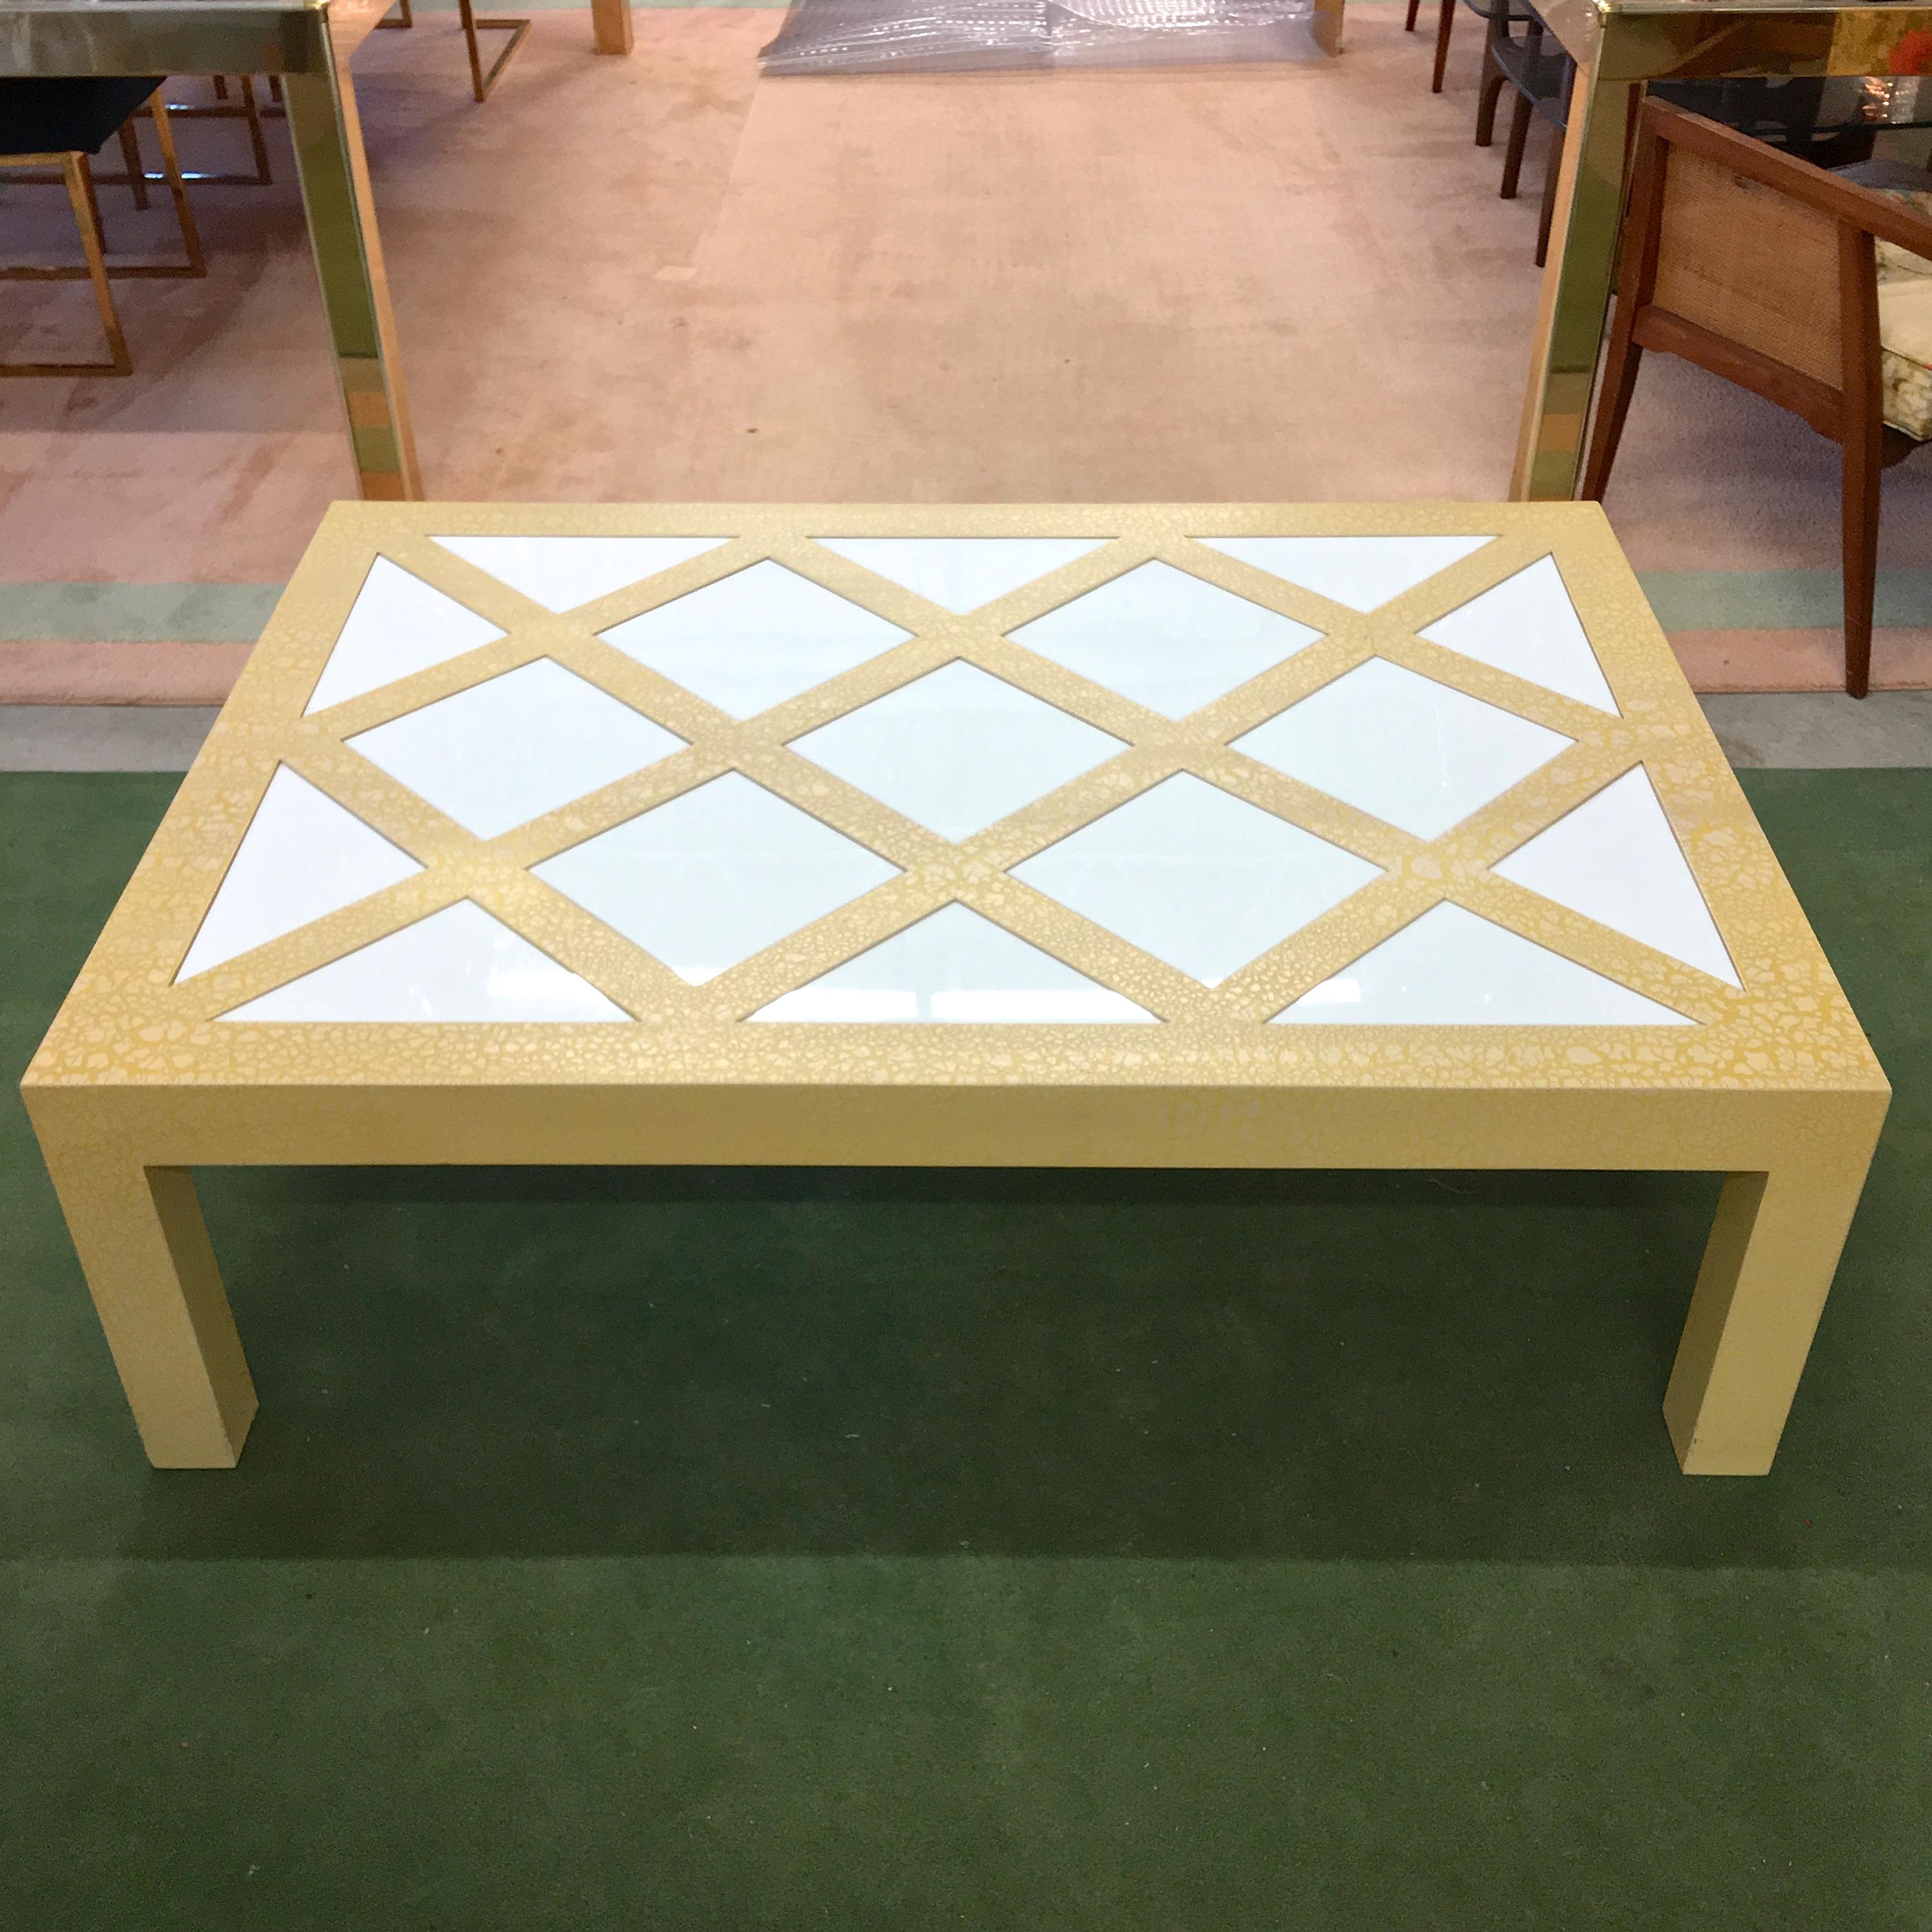 Milo Baughman Style, circa 1972 rectangular parsons cocktail table in yellow crackled finish with inset white Vitrolite glass parquetry tiles, square and triangle, forming a checkered trellis pattern.